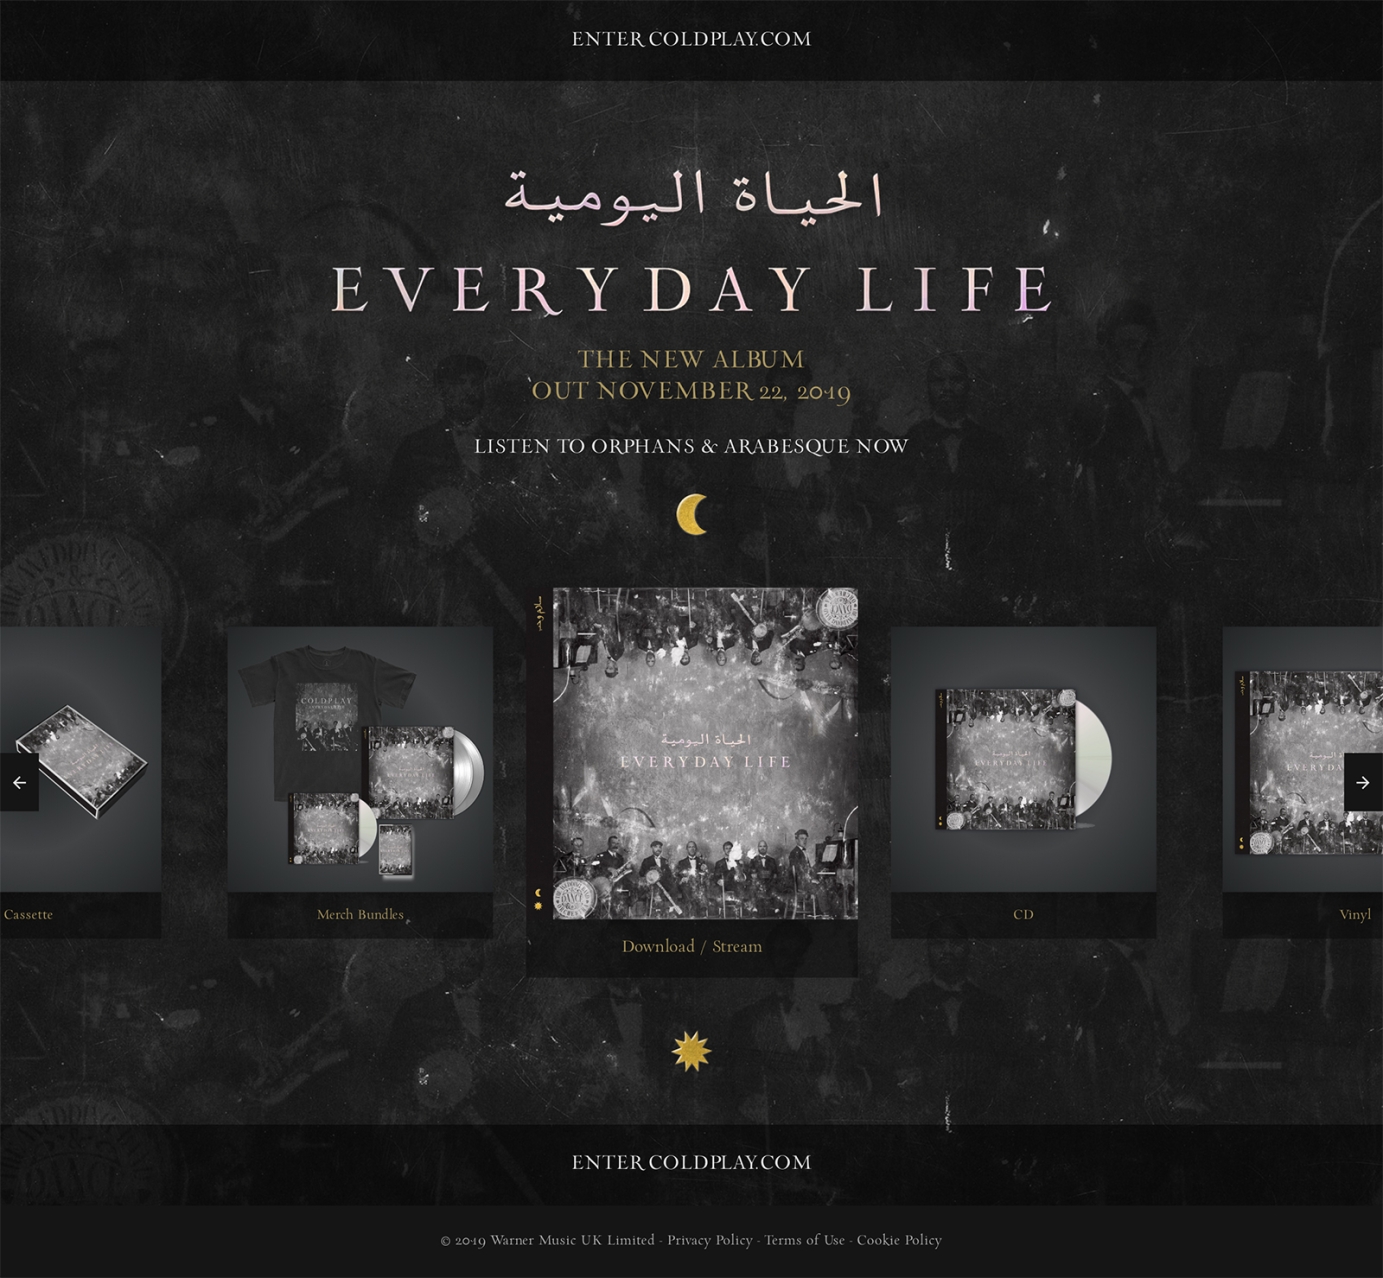 Coldplay - Everyday Life Websites